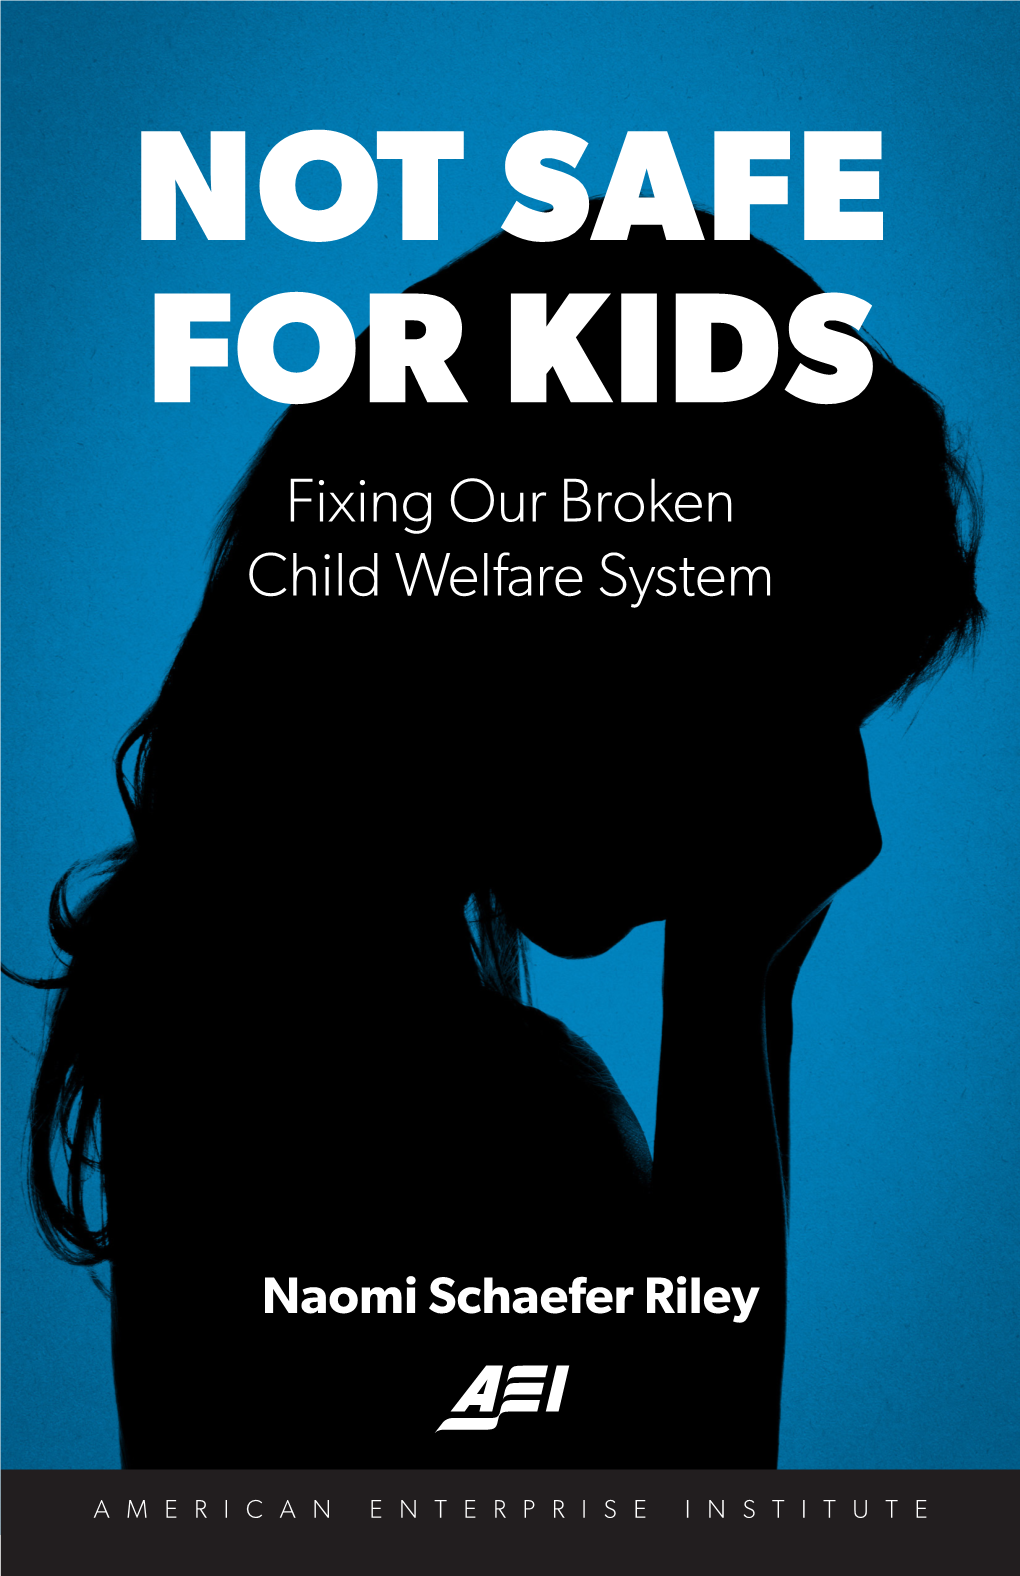 NOT SAFE for KIDS Fixing Our Broken Child Welfare System